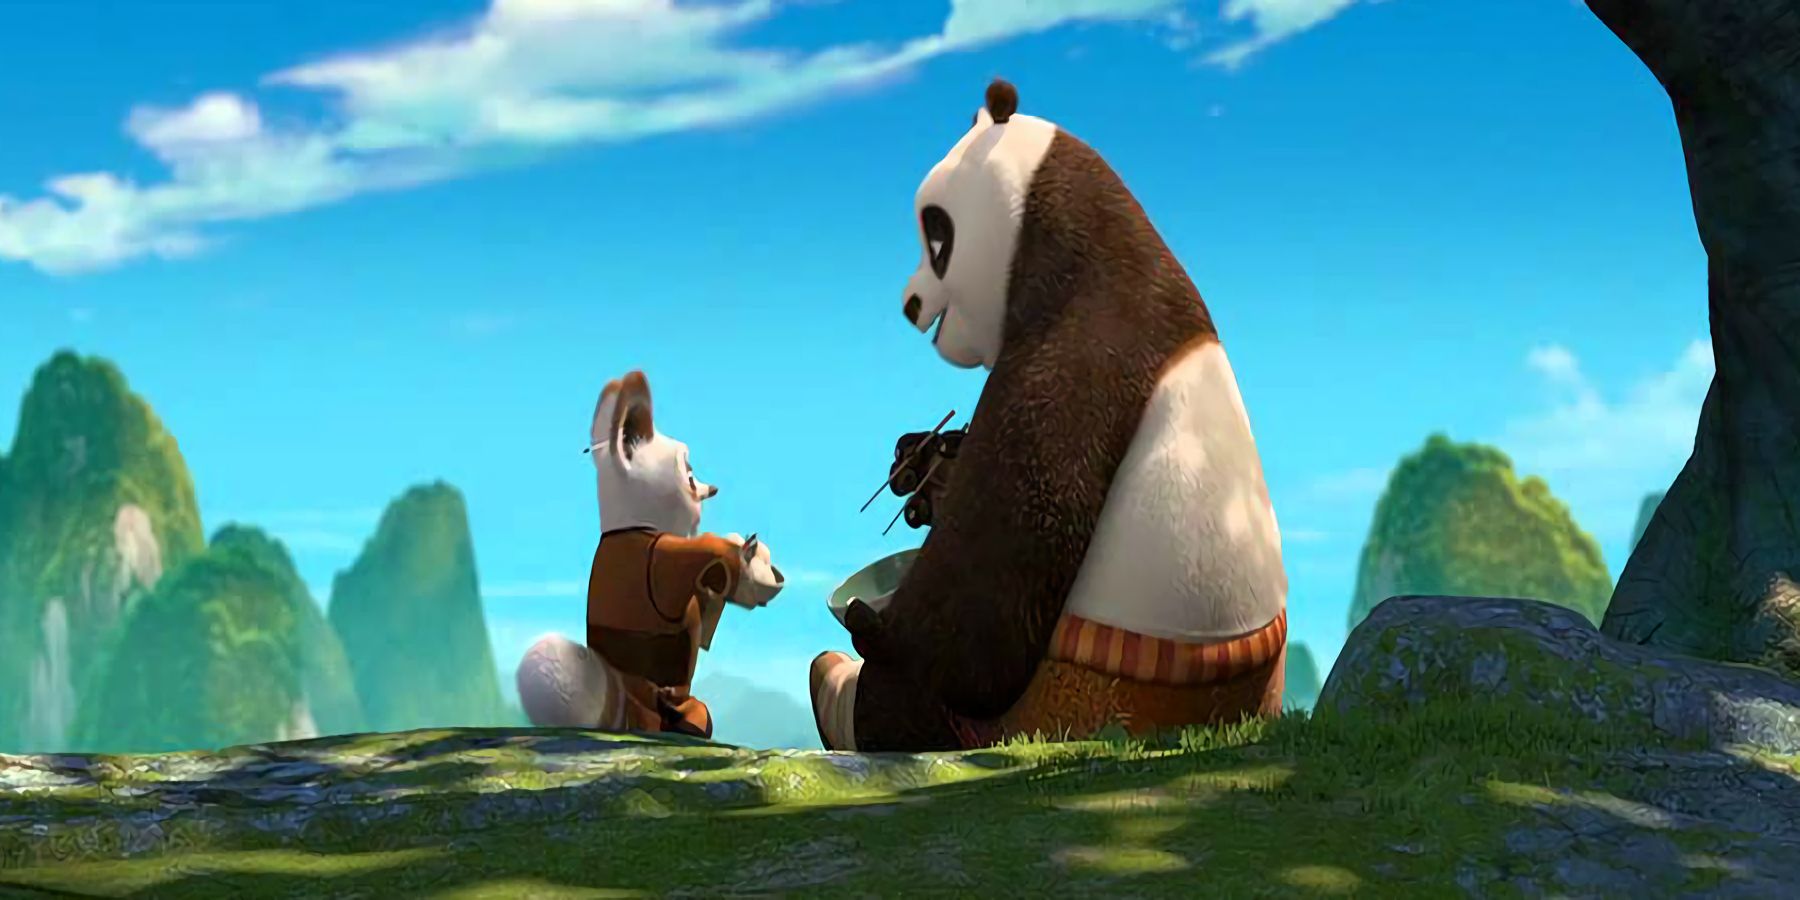 The 10 Best DreamWorks Animated Movies Of All Time According To IMDB